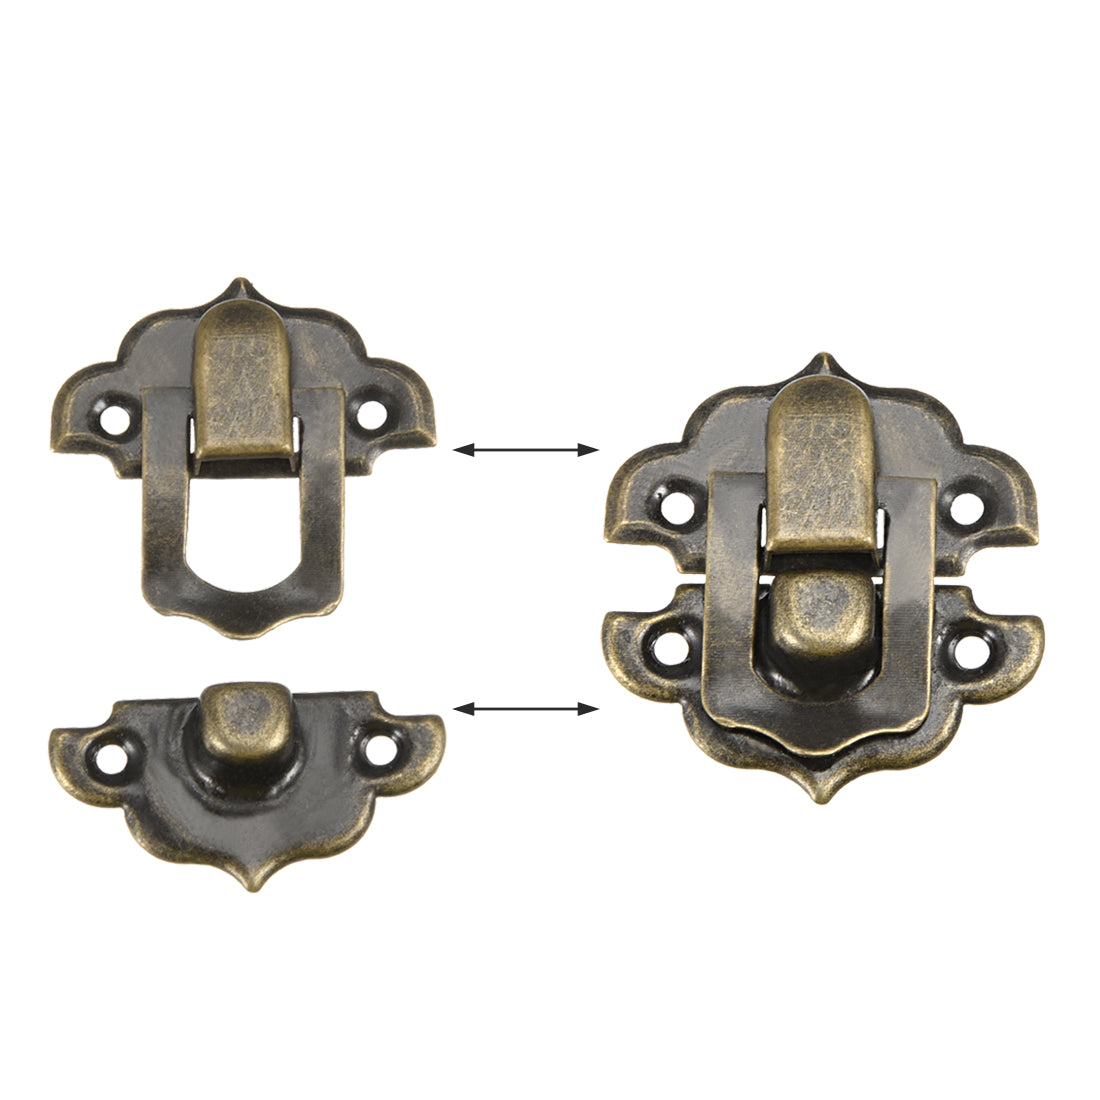 uxcell Uxcell Box Latch, Small Size Bronze Decorative Hasp Jewelry cases Catch w Screws 30 Sets